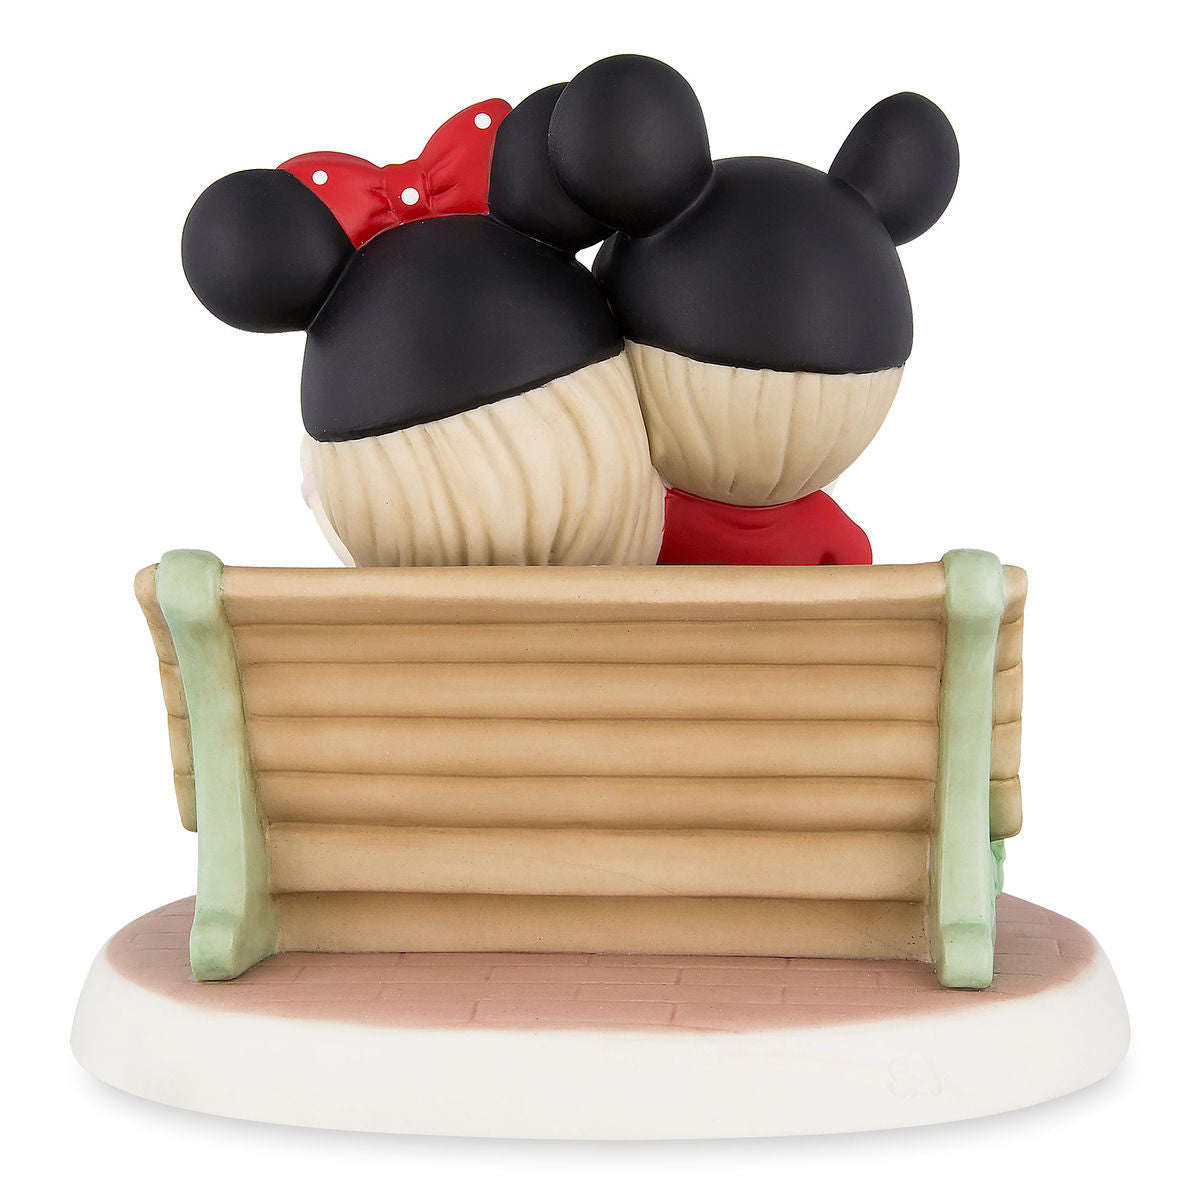 Disney Mouseketeers on Park Bench Figure by Precious Moments New with Box